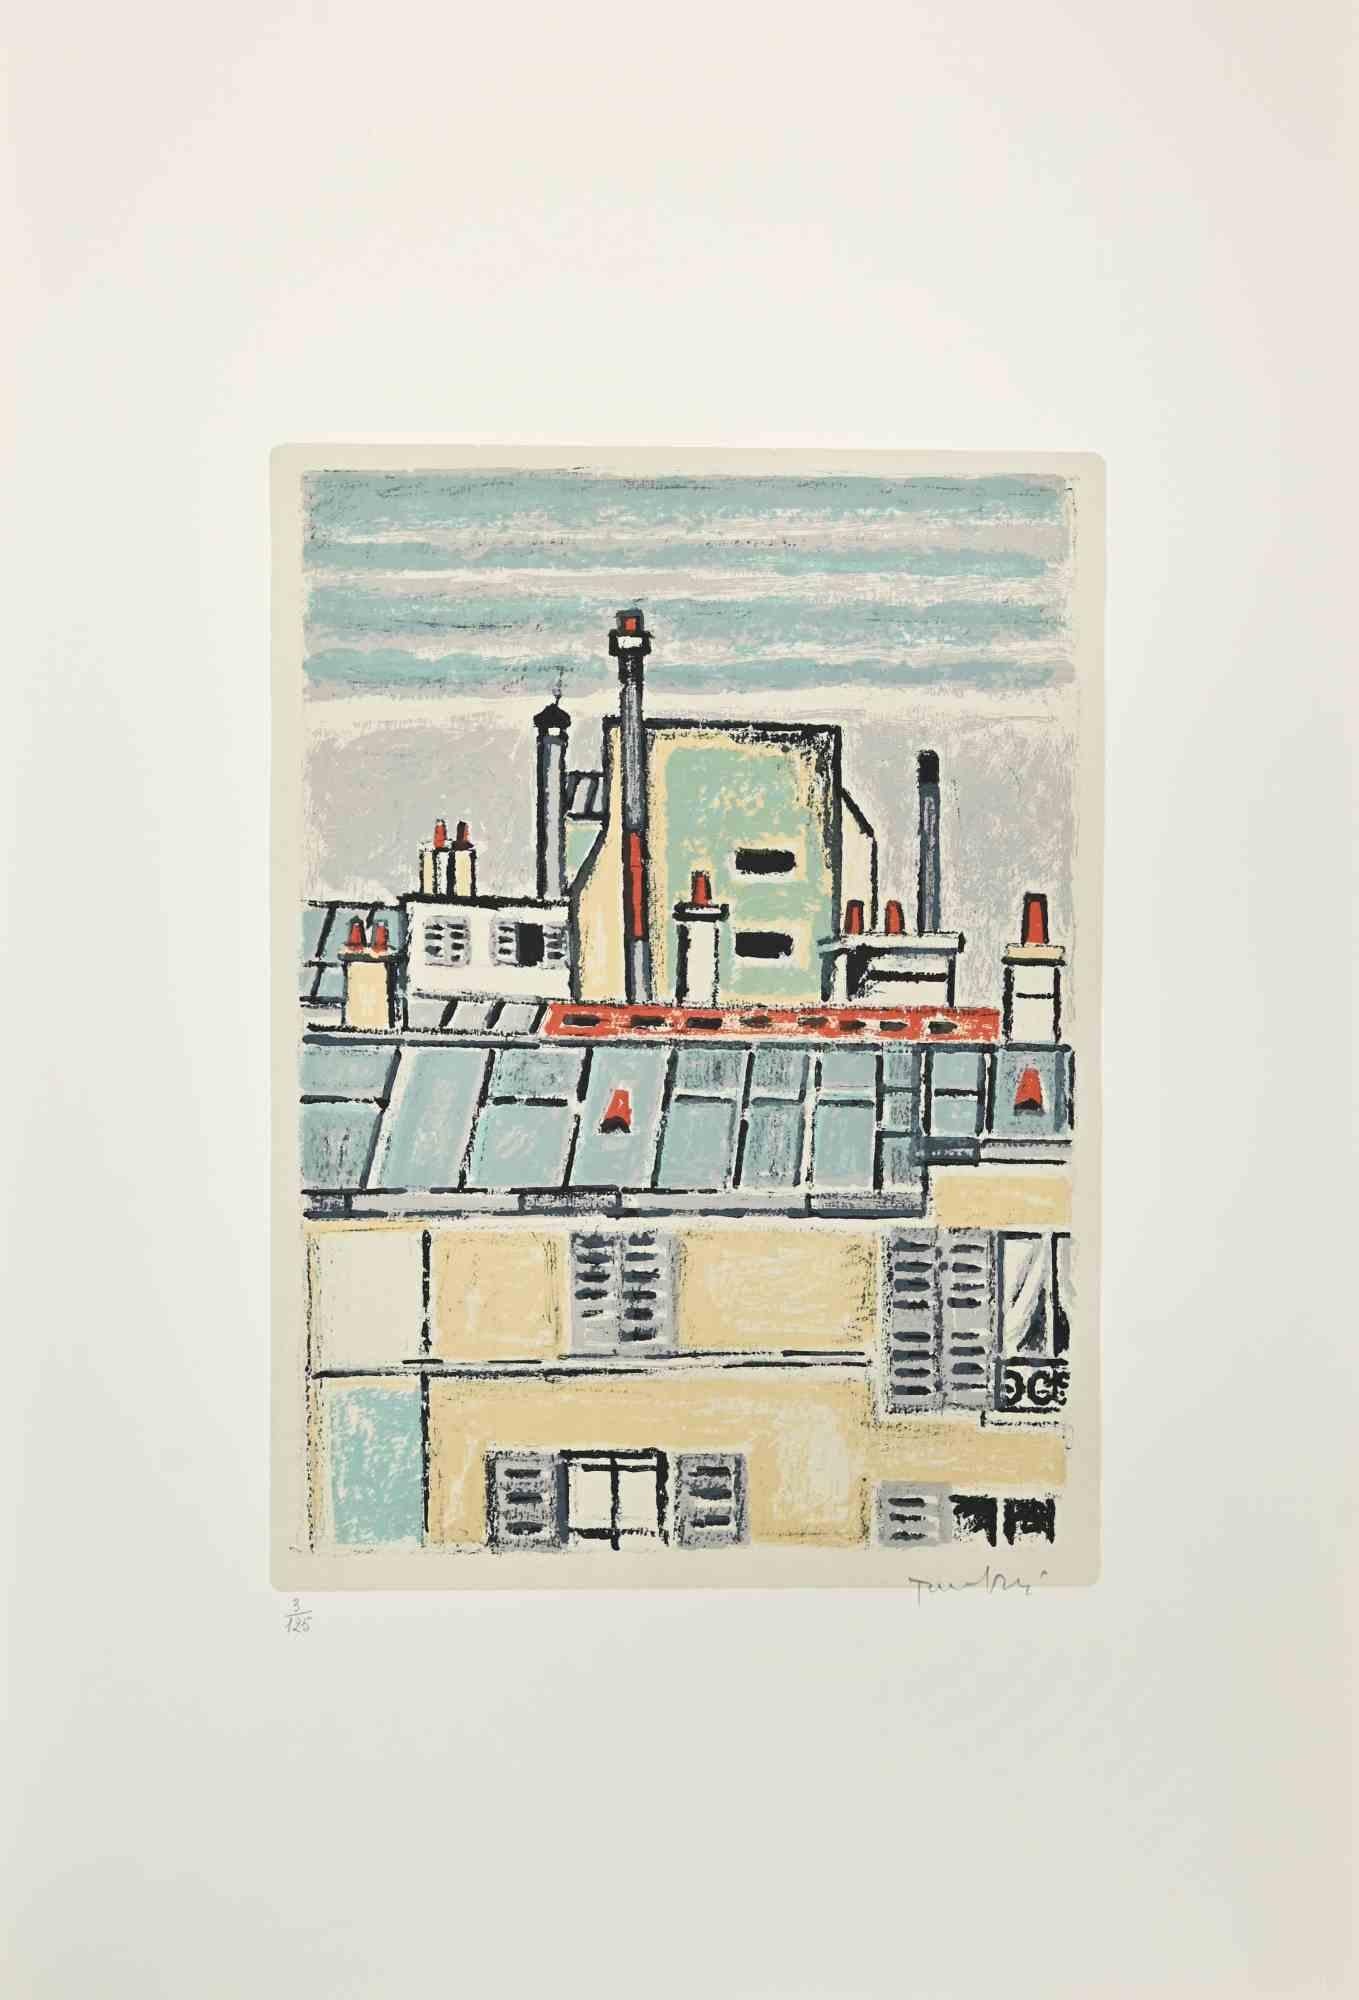 View of Paris - Lithograph By Orfeo Tamburi - 1980s